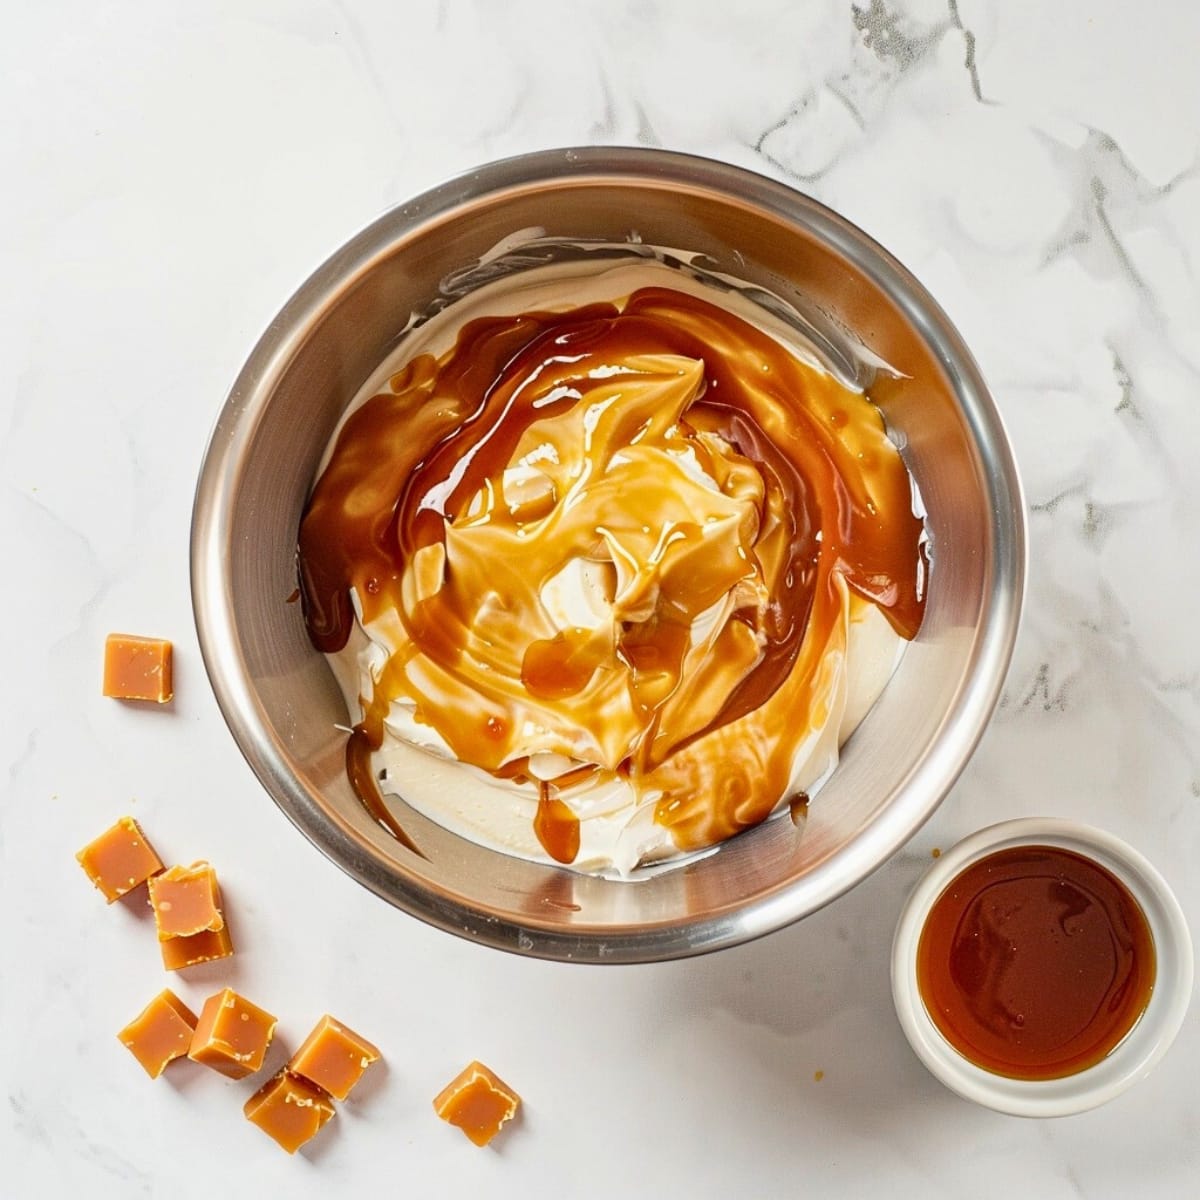 Whipped cream with caramel syrup on a stainless bowl.